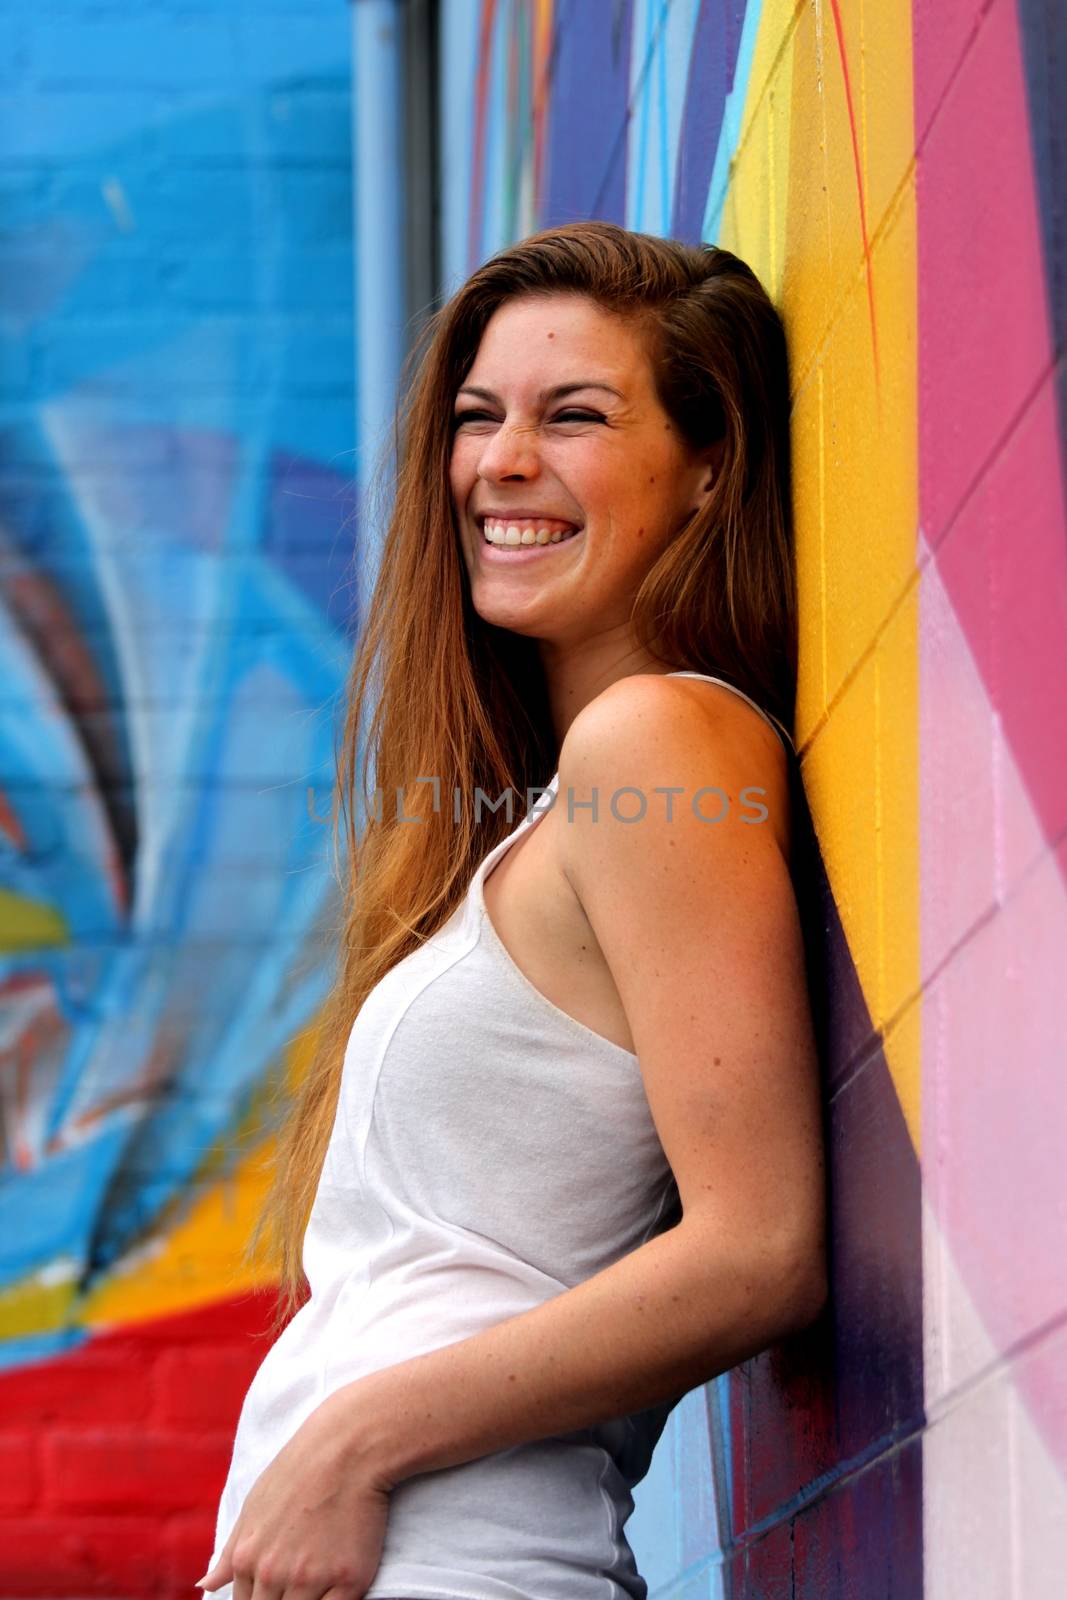 Young woman standing in front of a colorful background.